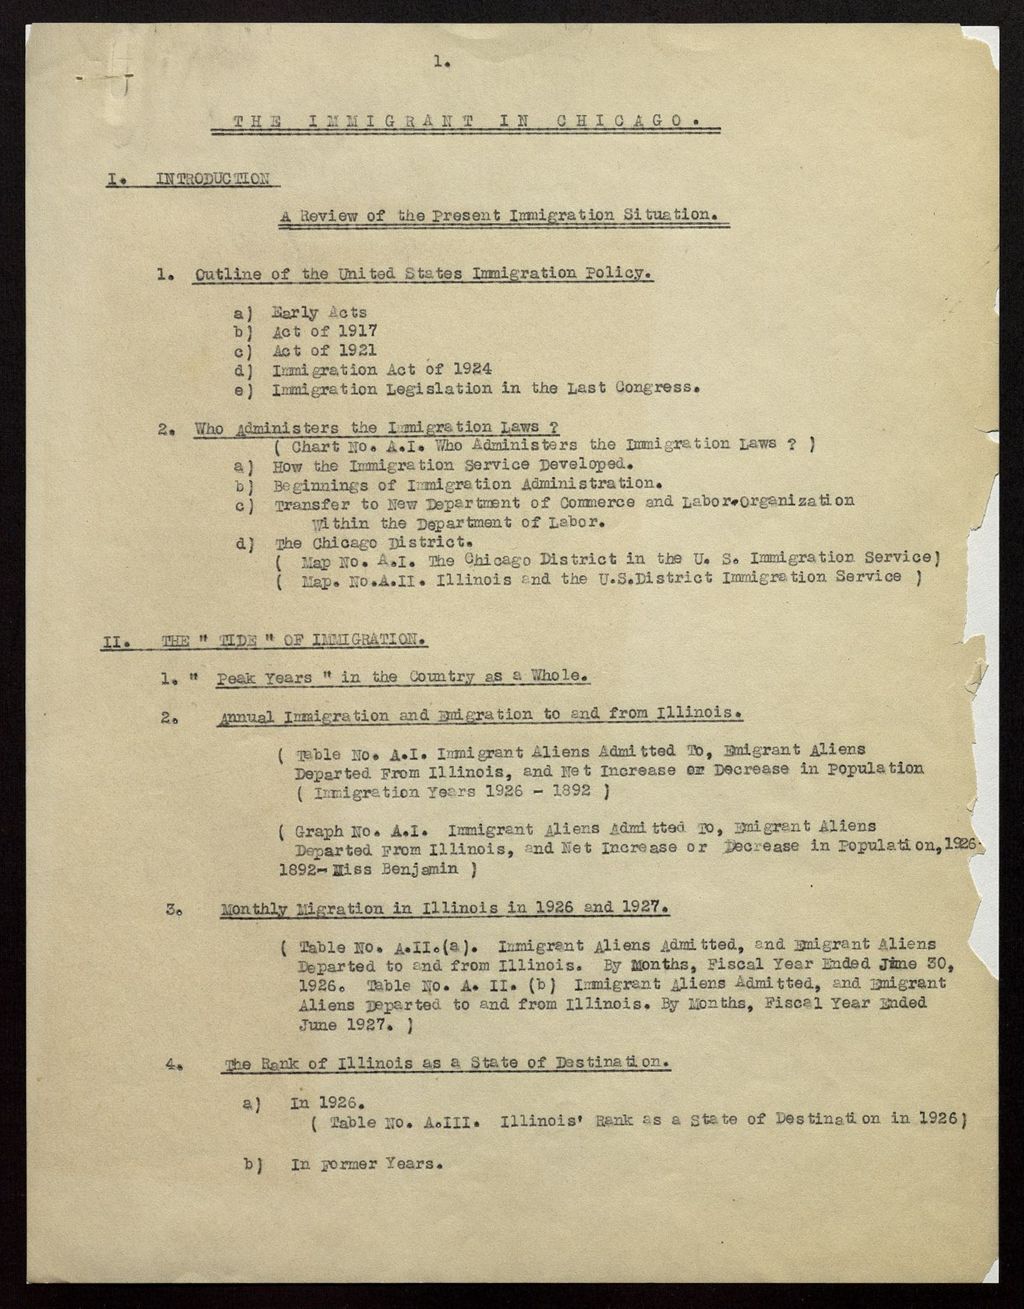 Miniature of Review of the Present Immigrant Situation, 1917-1933 (Folder 105)